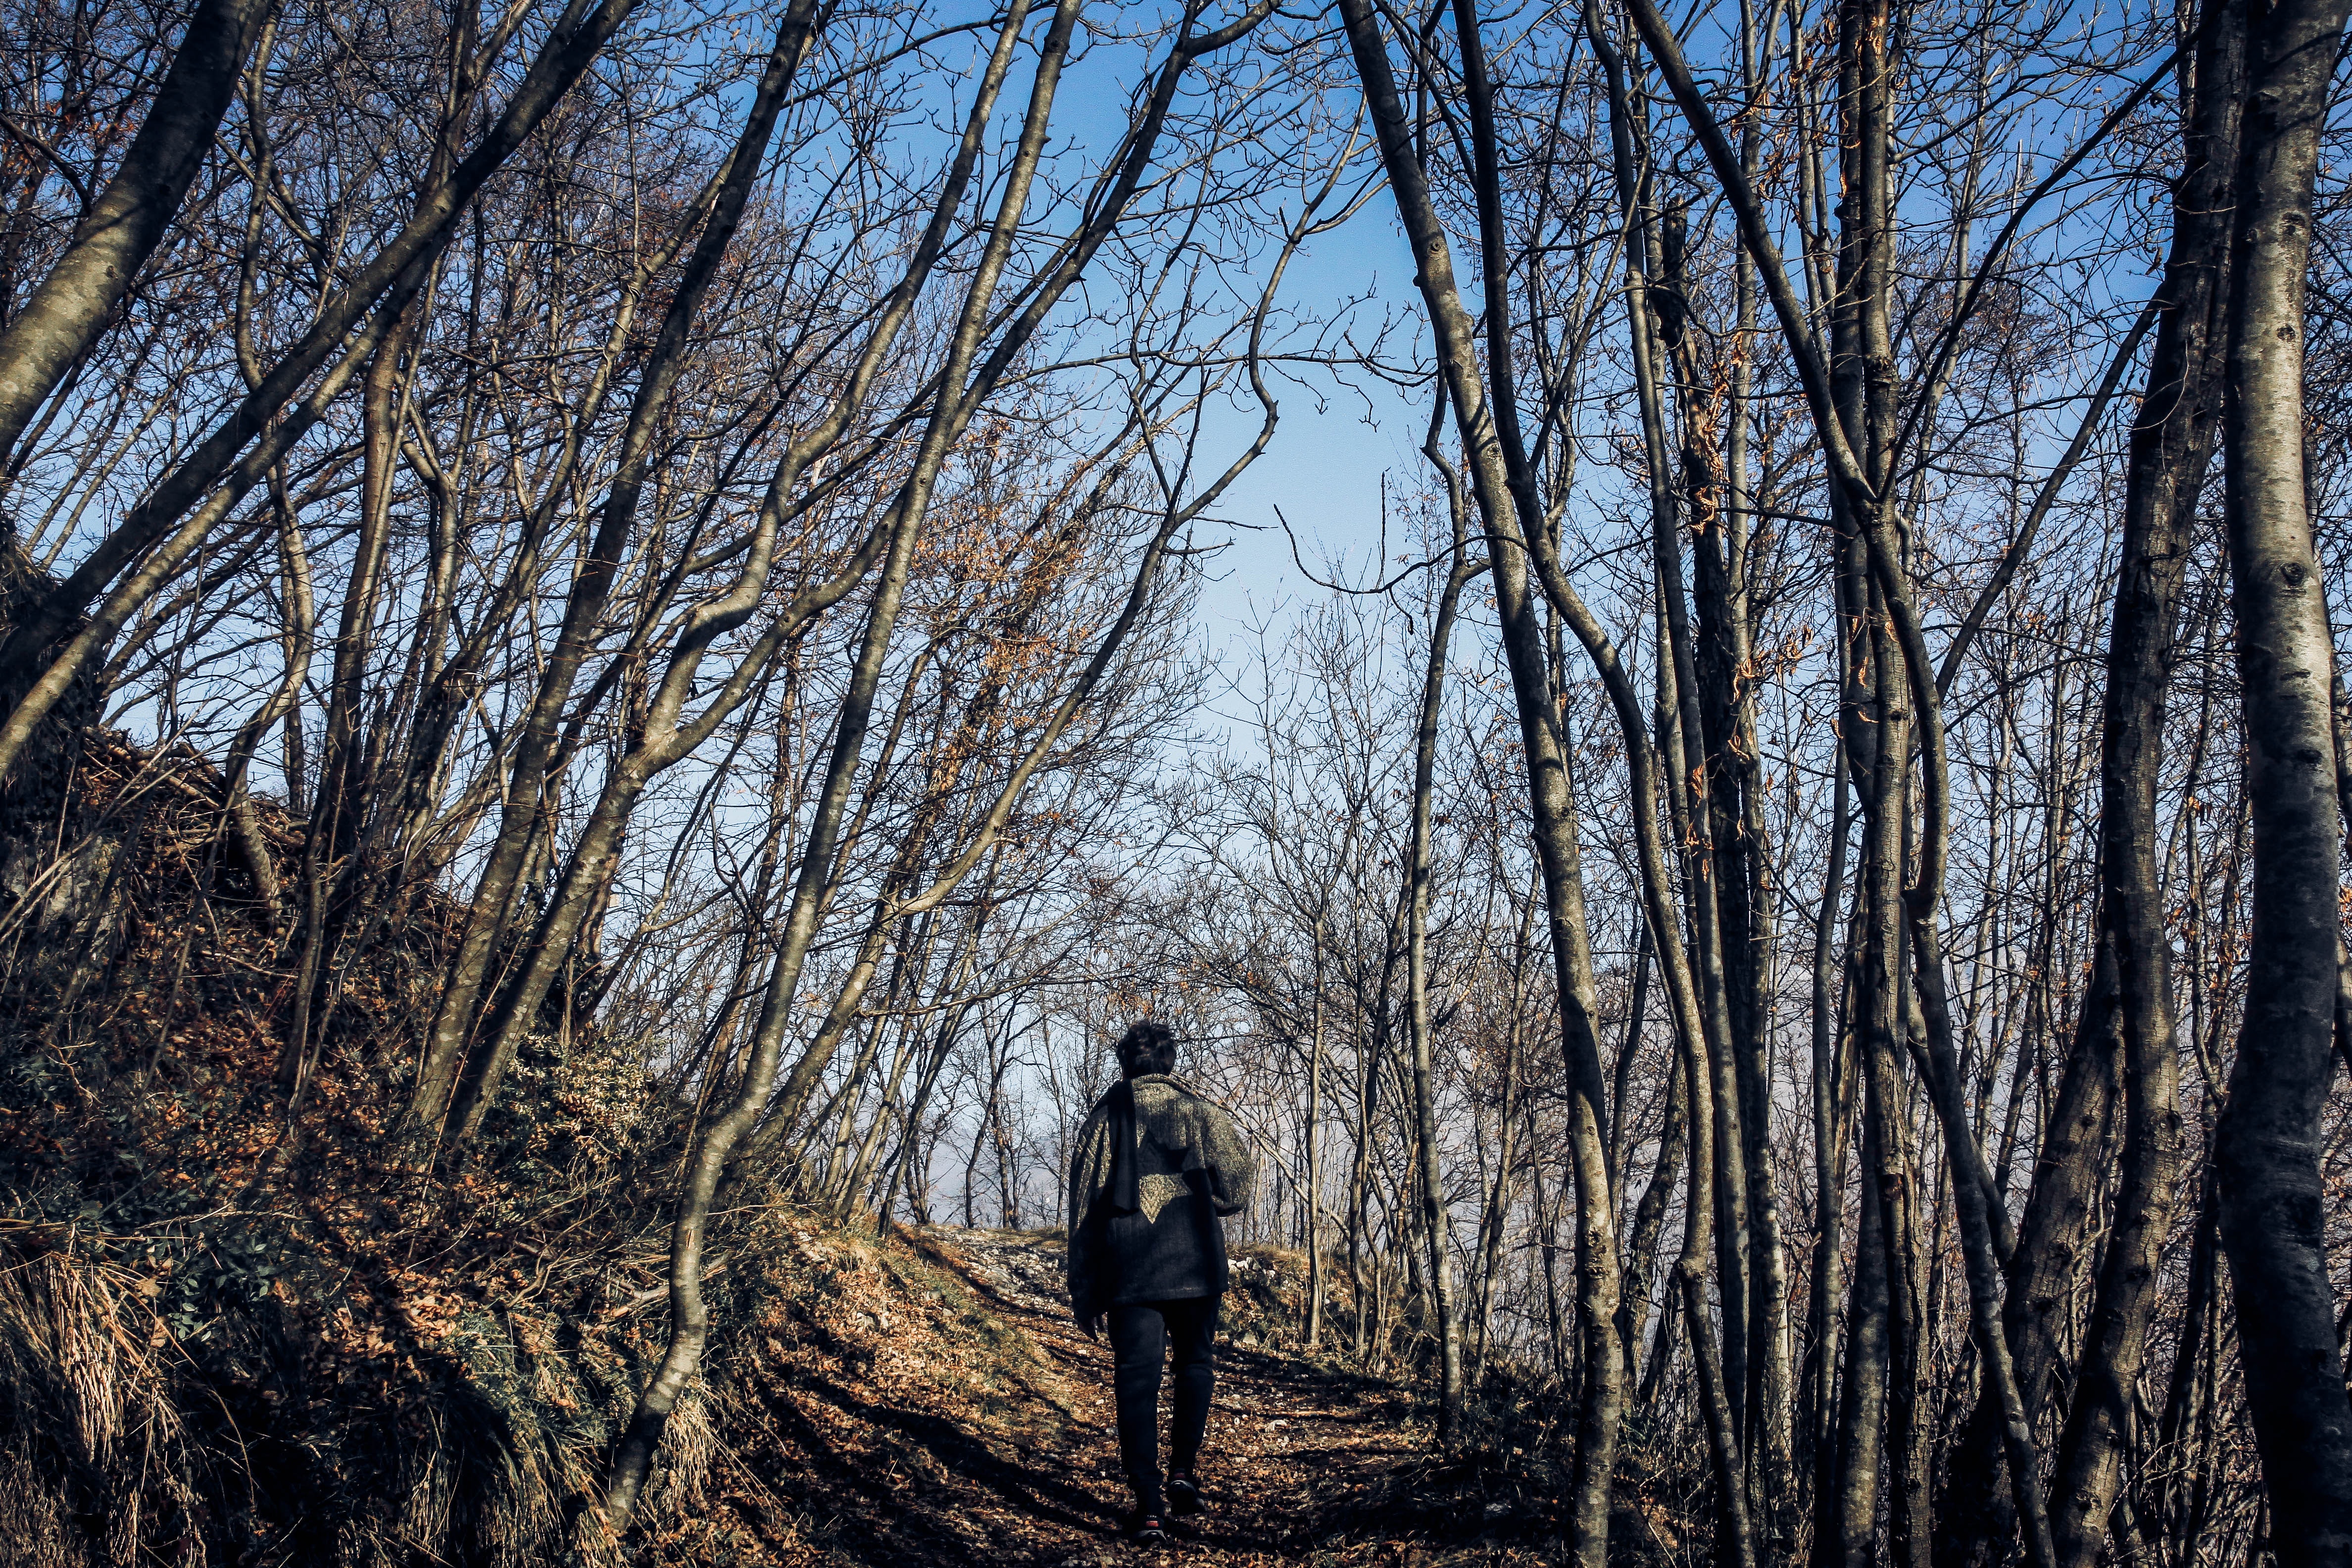 Man in Middle of Forest, Alone, Landscape, Trees, Season, HQ Photo